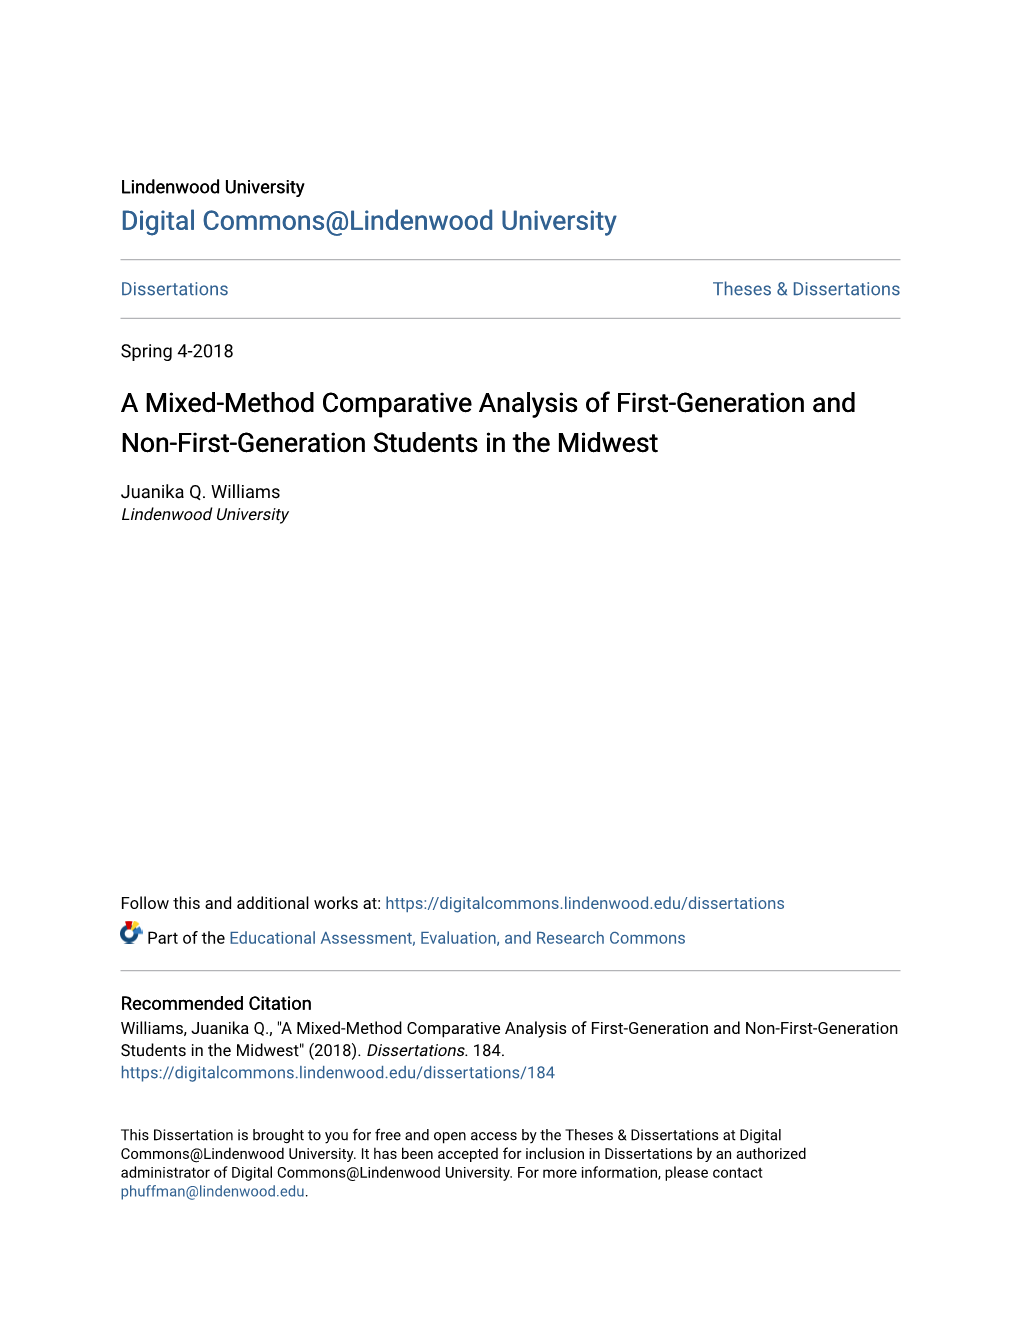 A Mixed-Method Comparative Analysis of First-Generation and Non-First-Generation Students in the Midwest